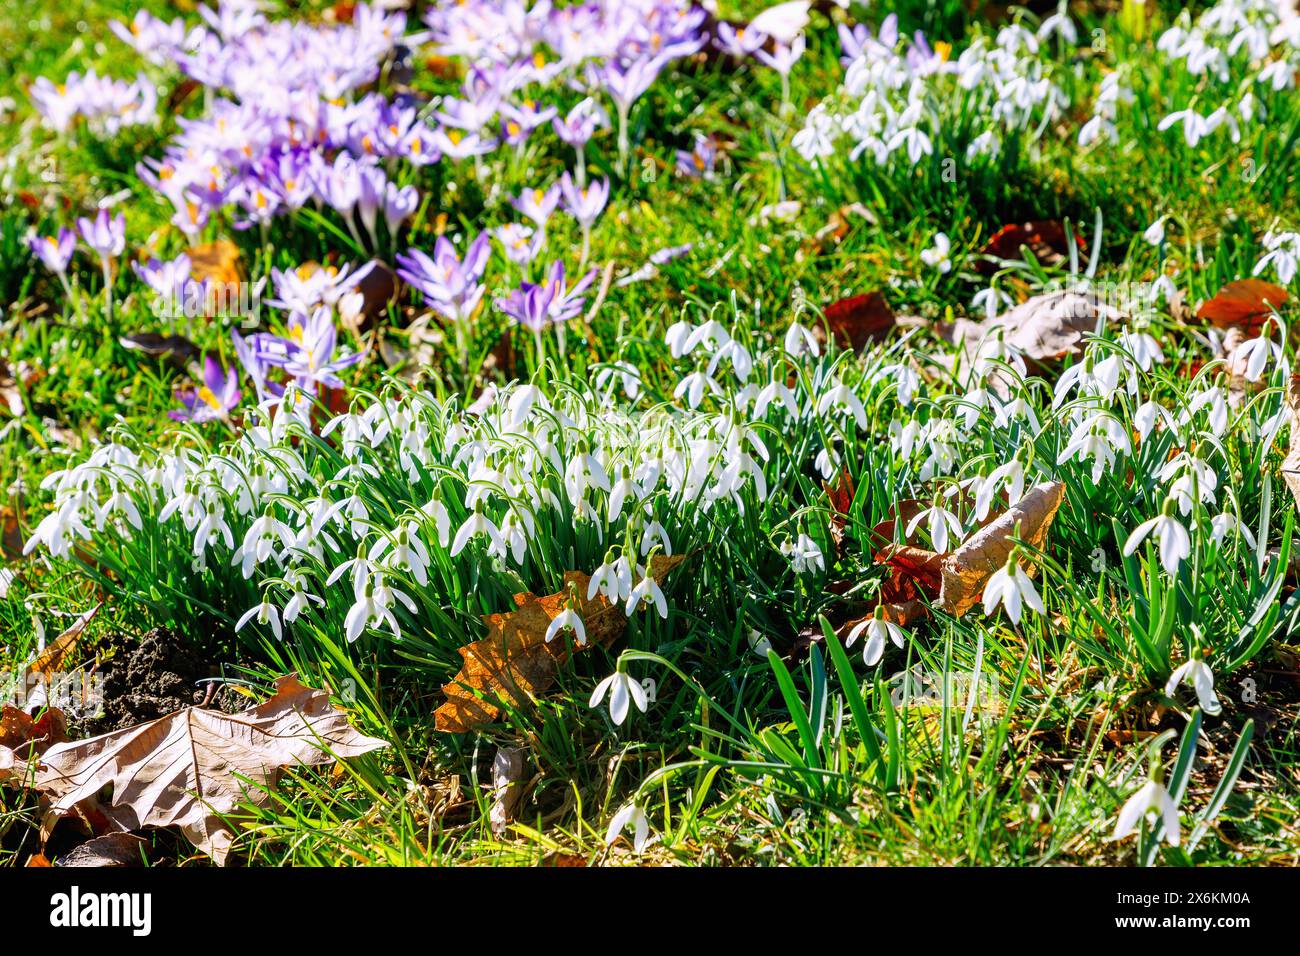 Snowdrops (Galanthus) and elf crocuses (Crocus tommasinianus) in the grass between autumn leaves Stock Photo